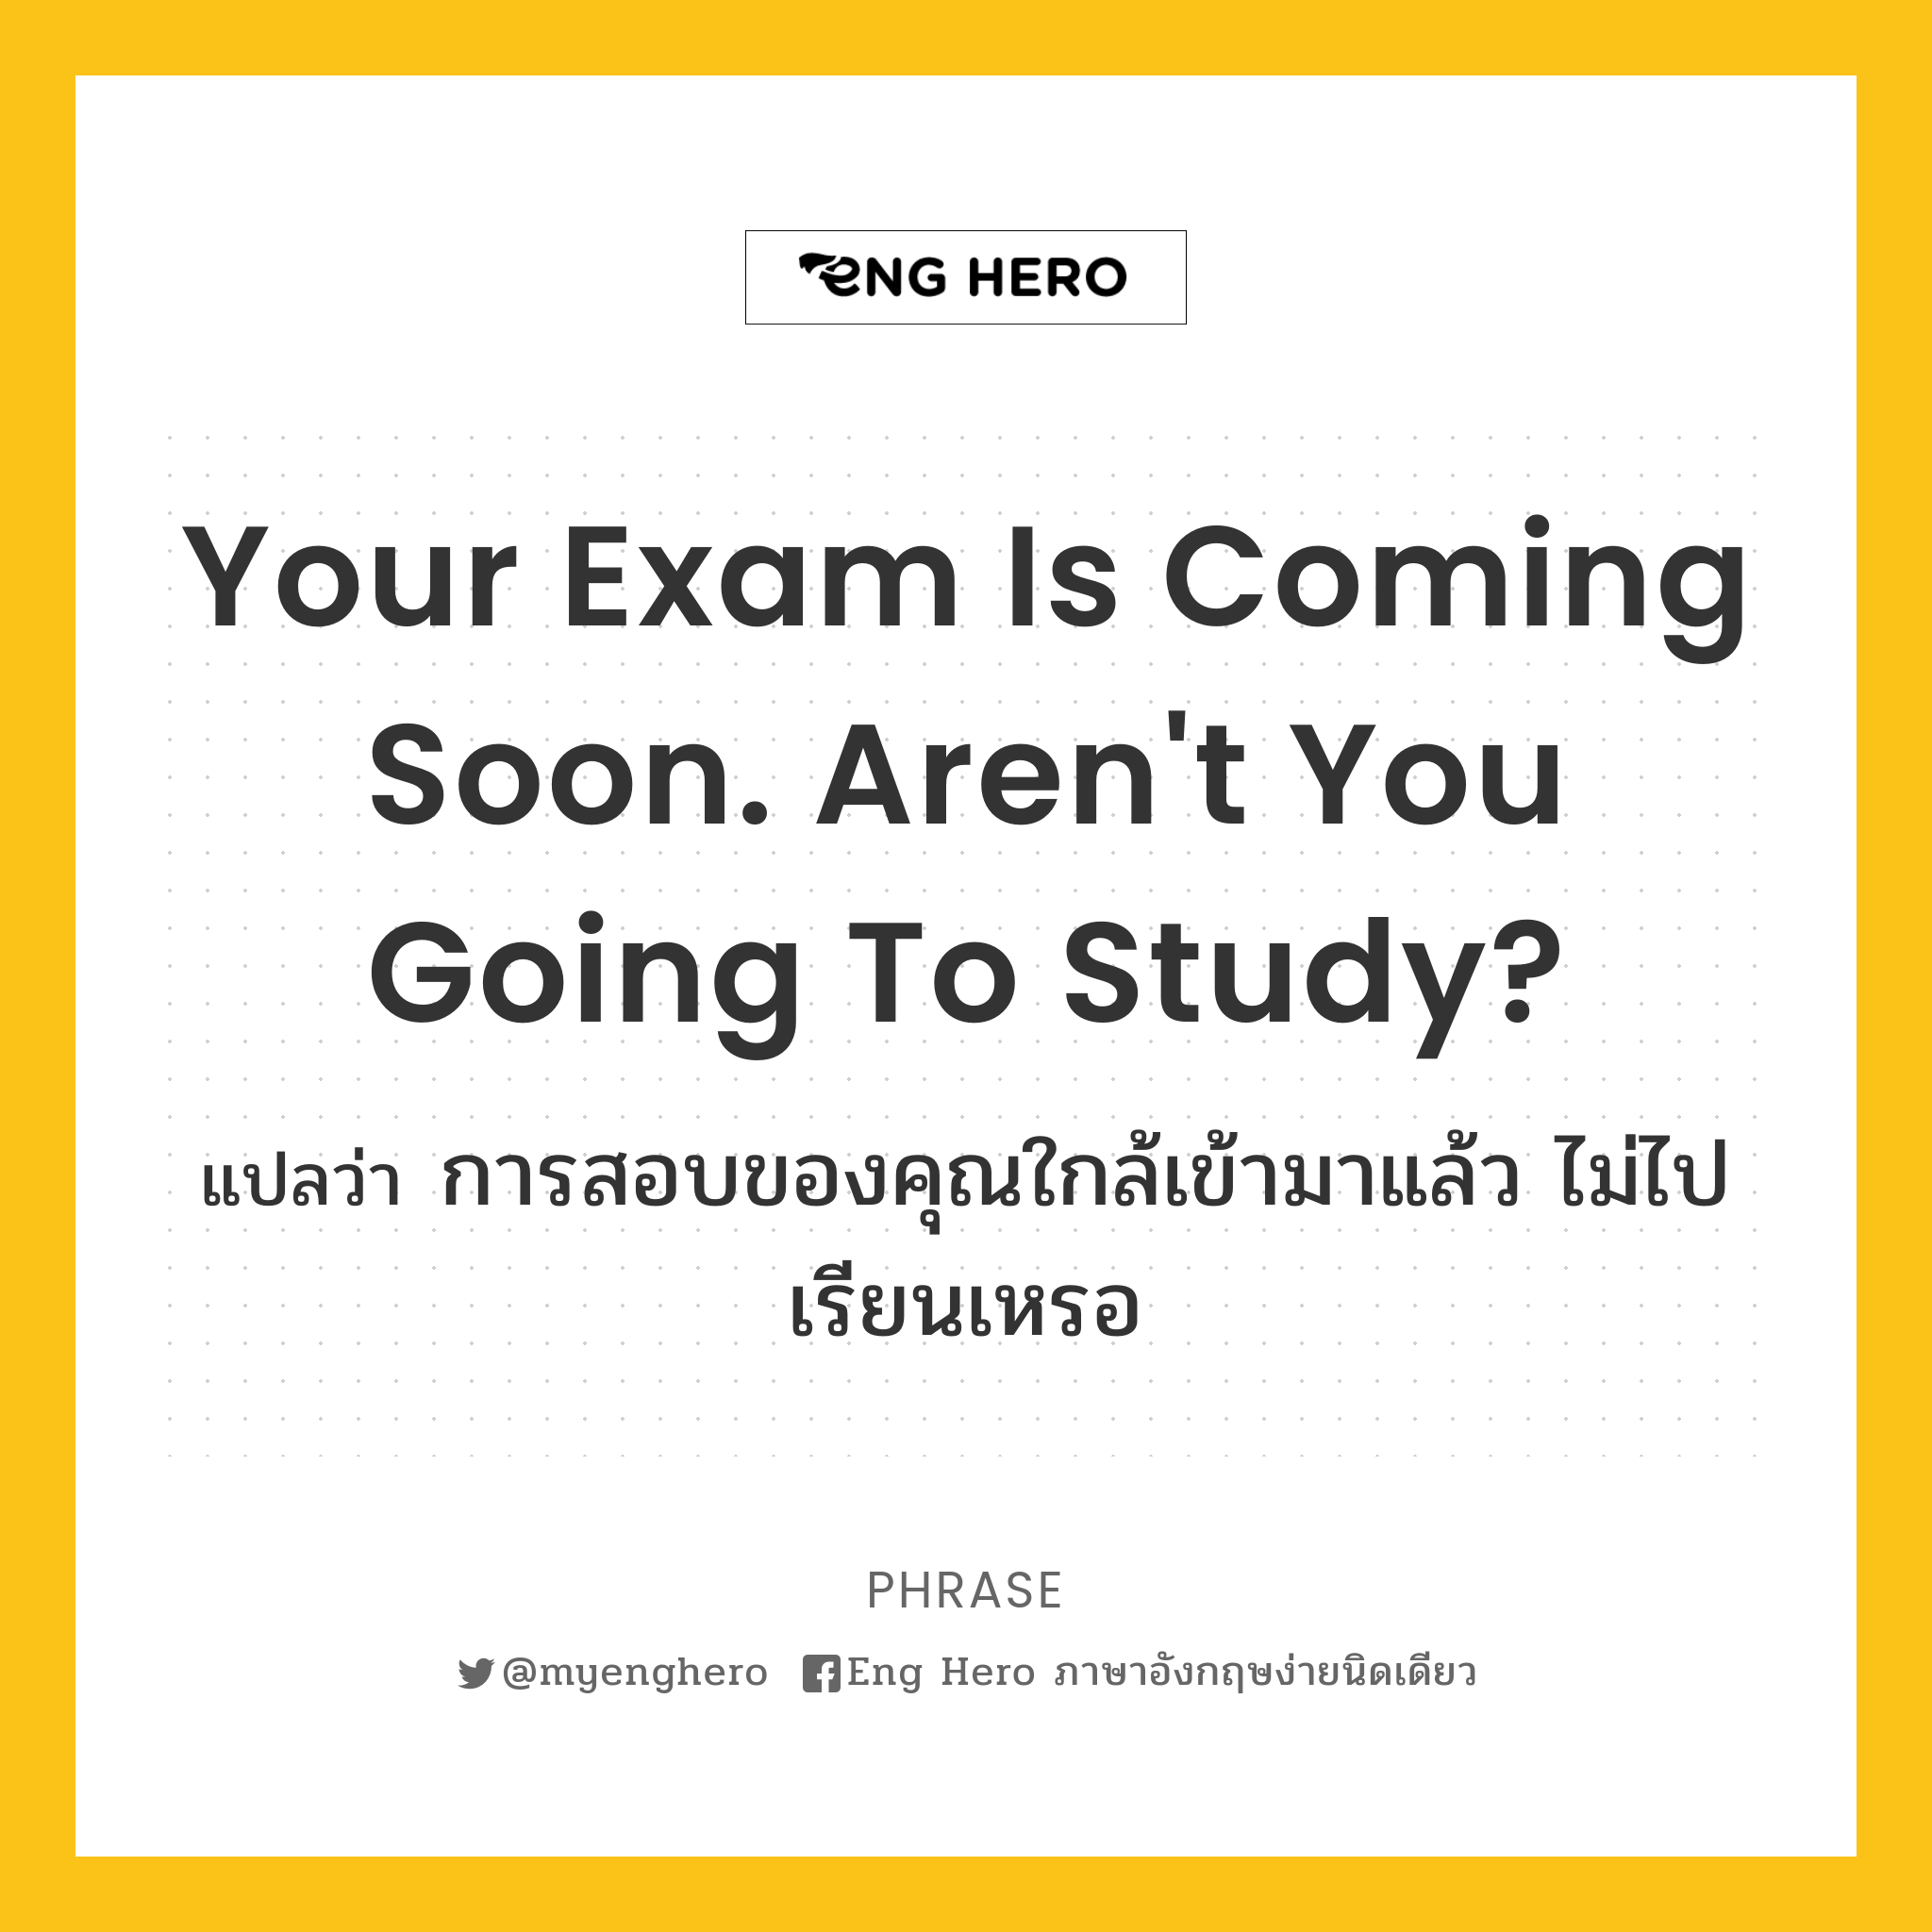 Your exam is coming soon. Aren't you going to study?